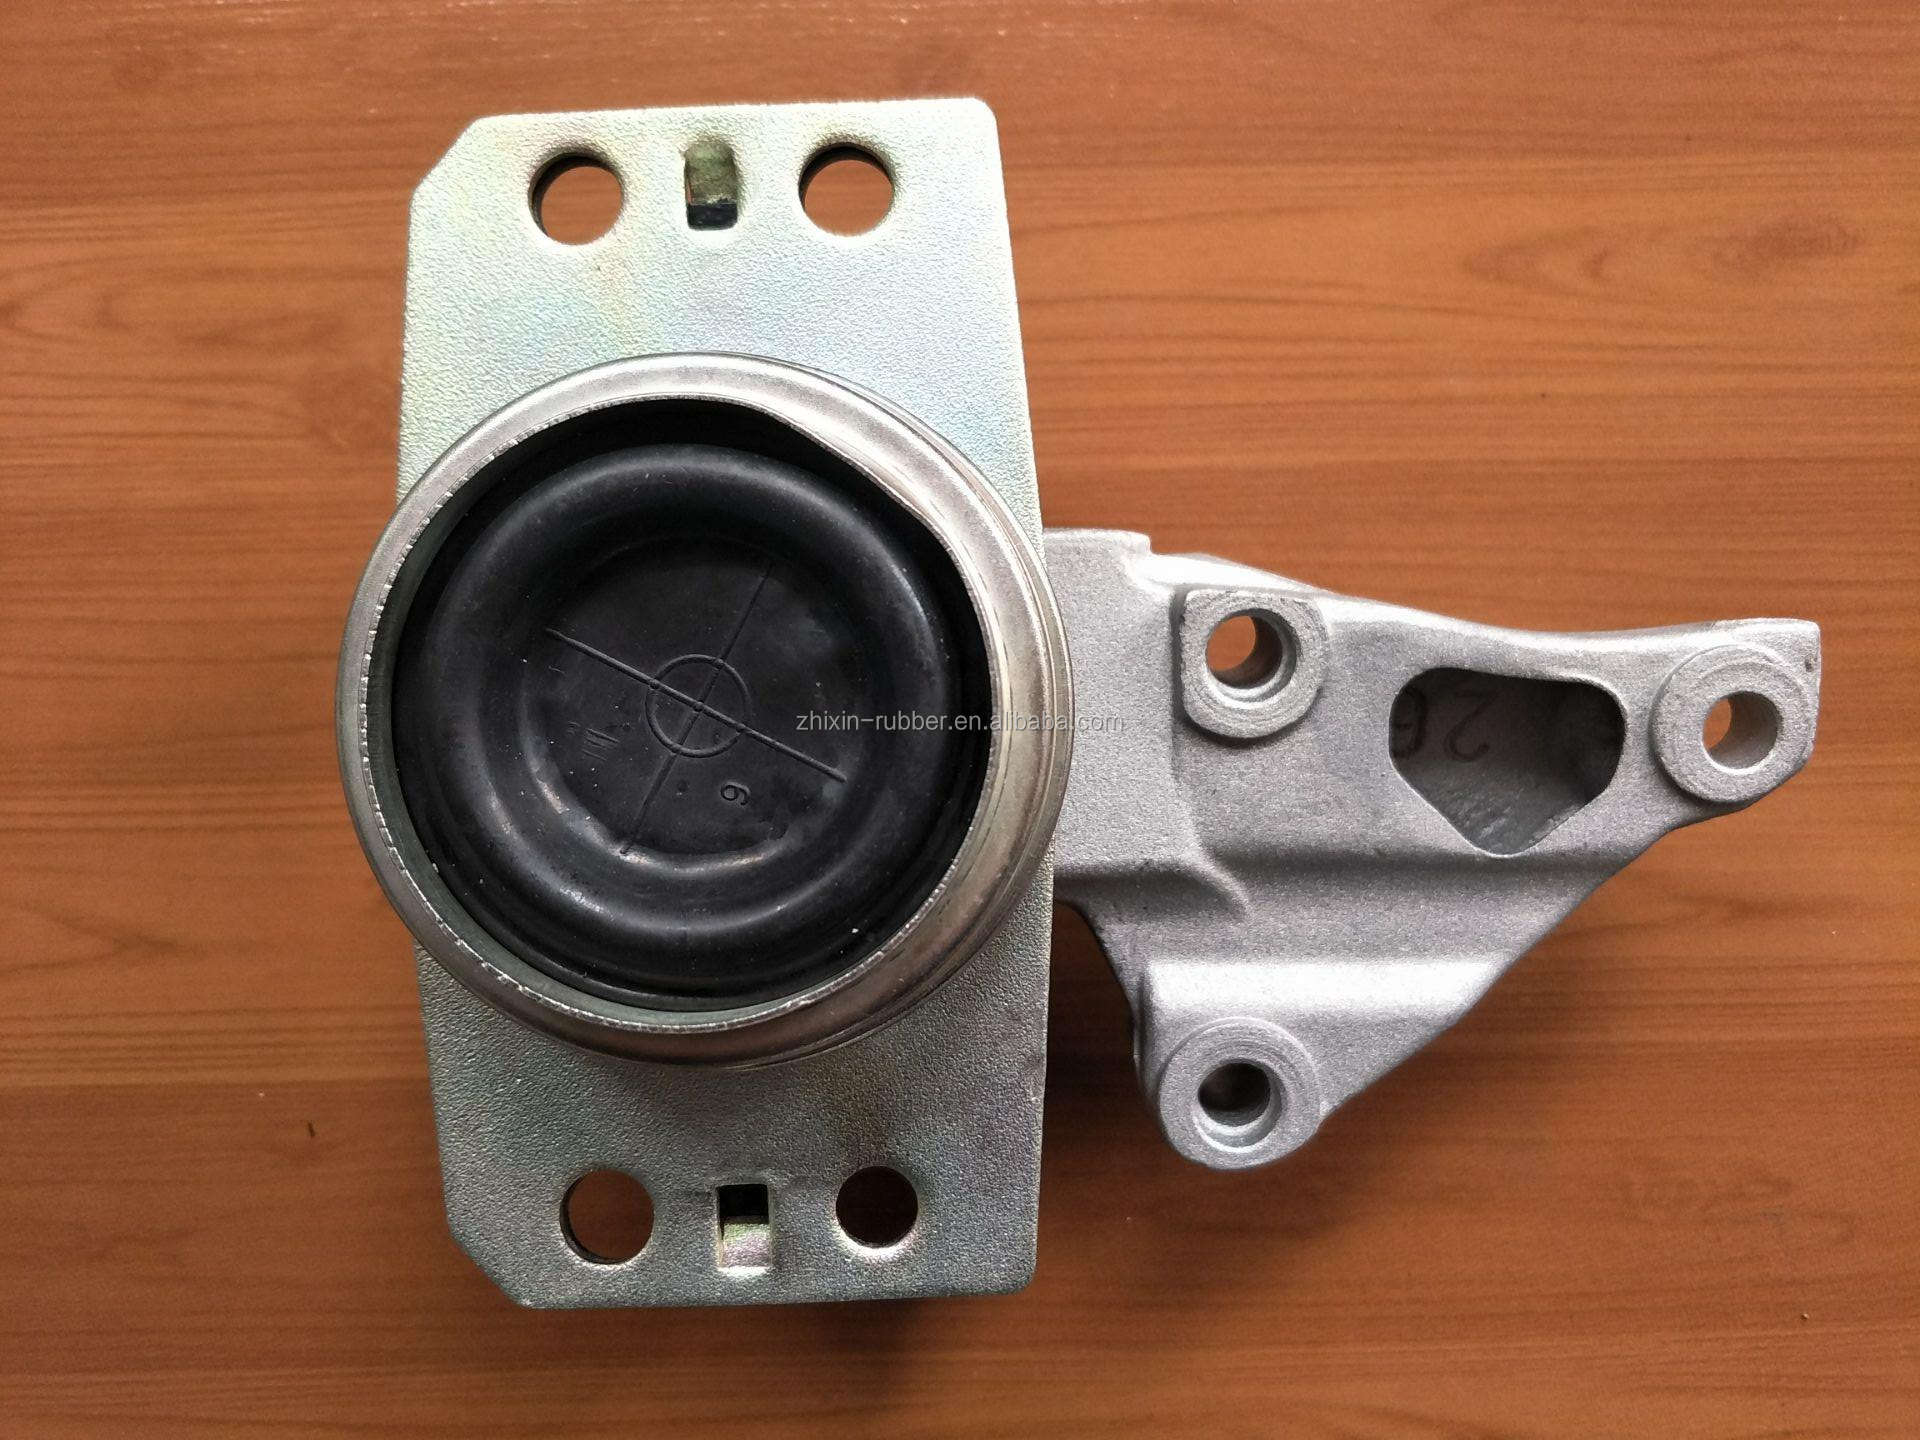 BSTIAUTO PEUGEOT 307 Hydraulic Engine mounting 1839.94 1839.H6